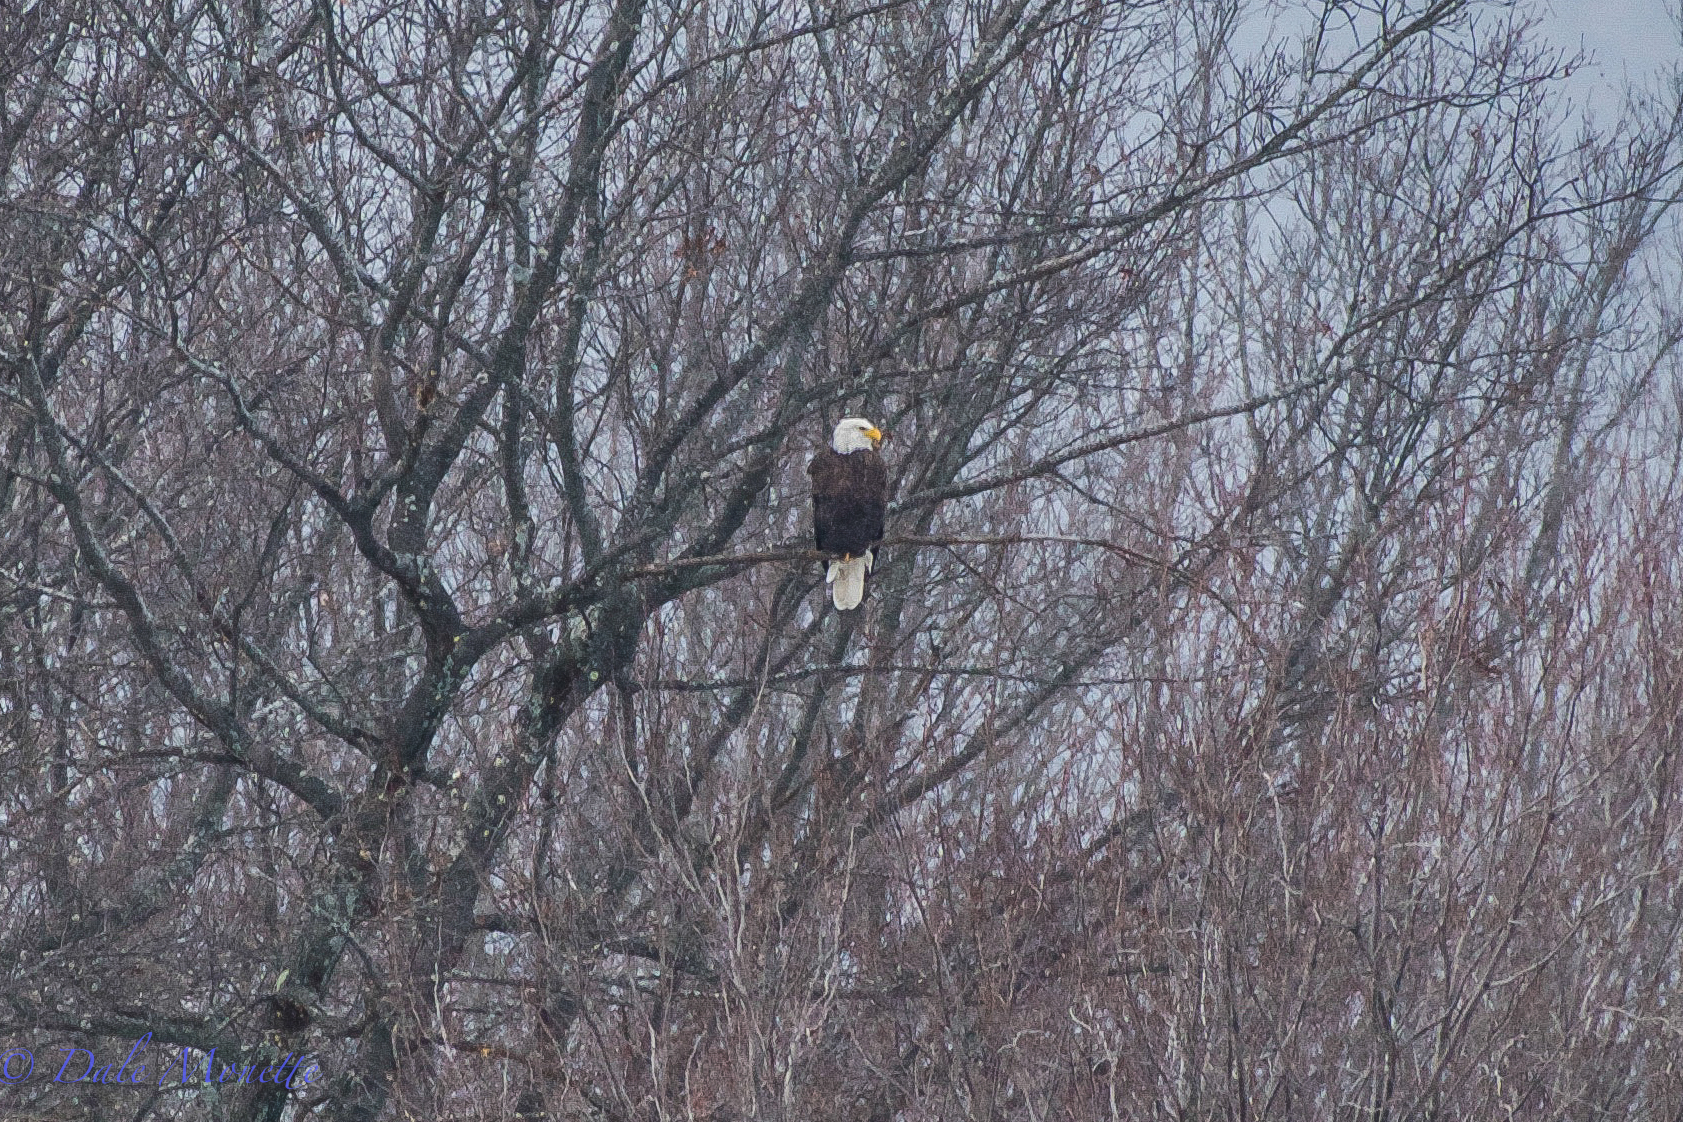   One of the bald eagles from the mating pair surveys their domain in the light snow in northern Quabbin today. &nbsp;1/14/16  